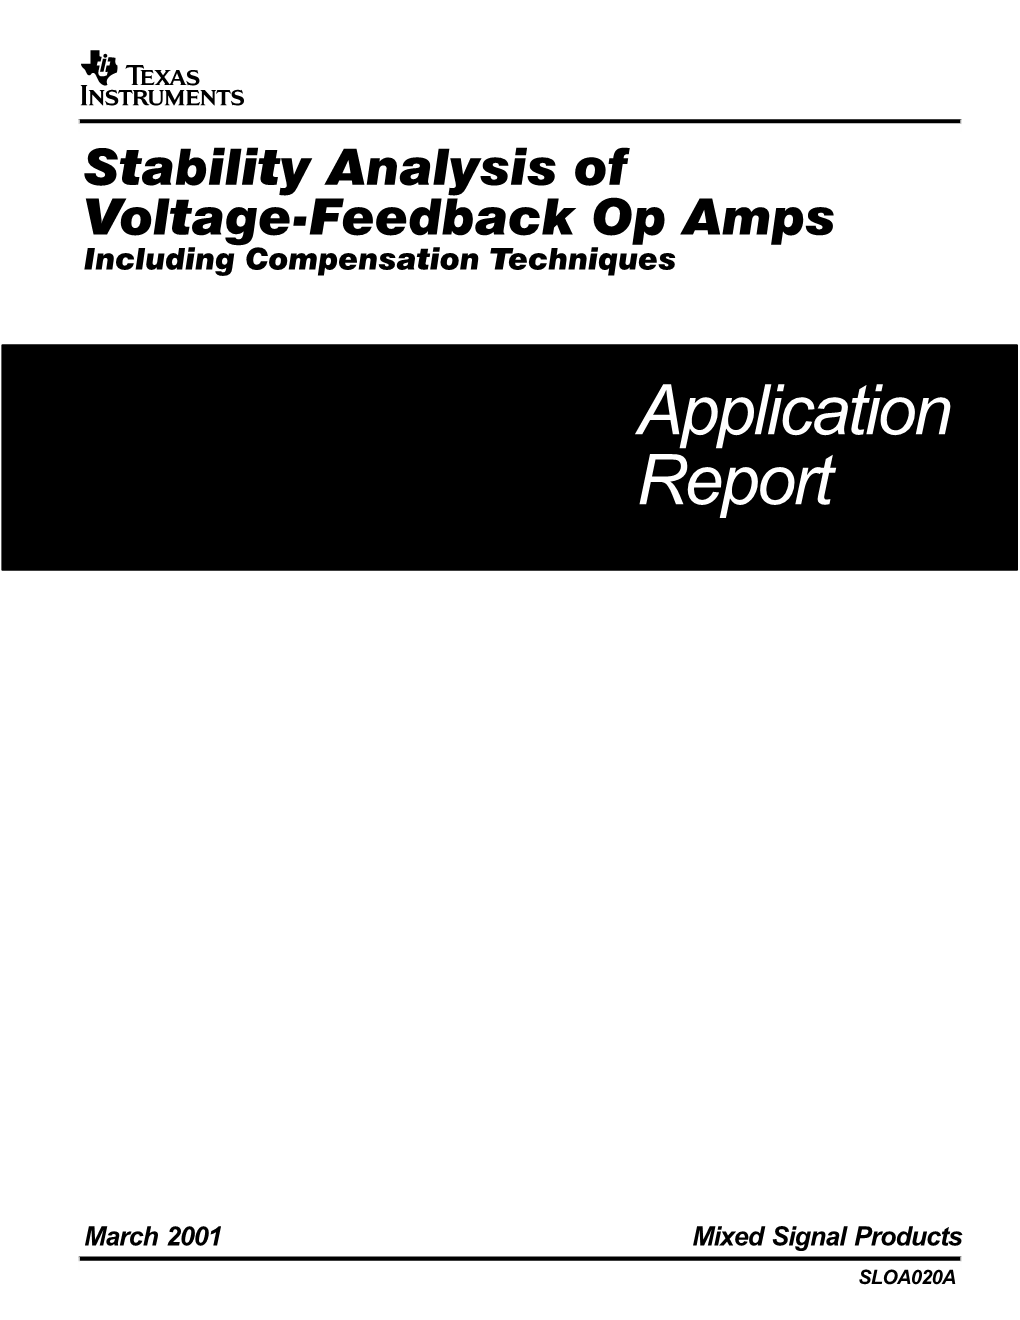 Stability Analysis of Voltage-Feedback Op Amps,Including